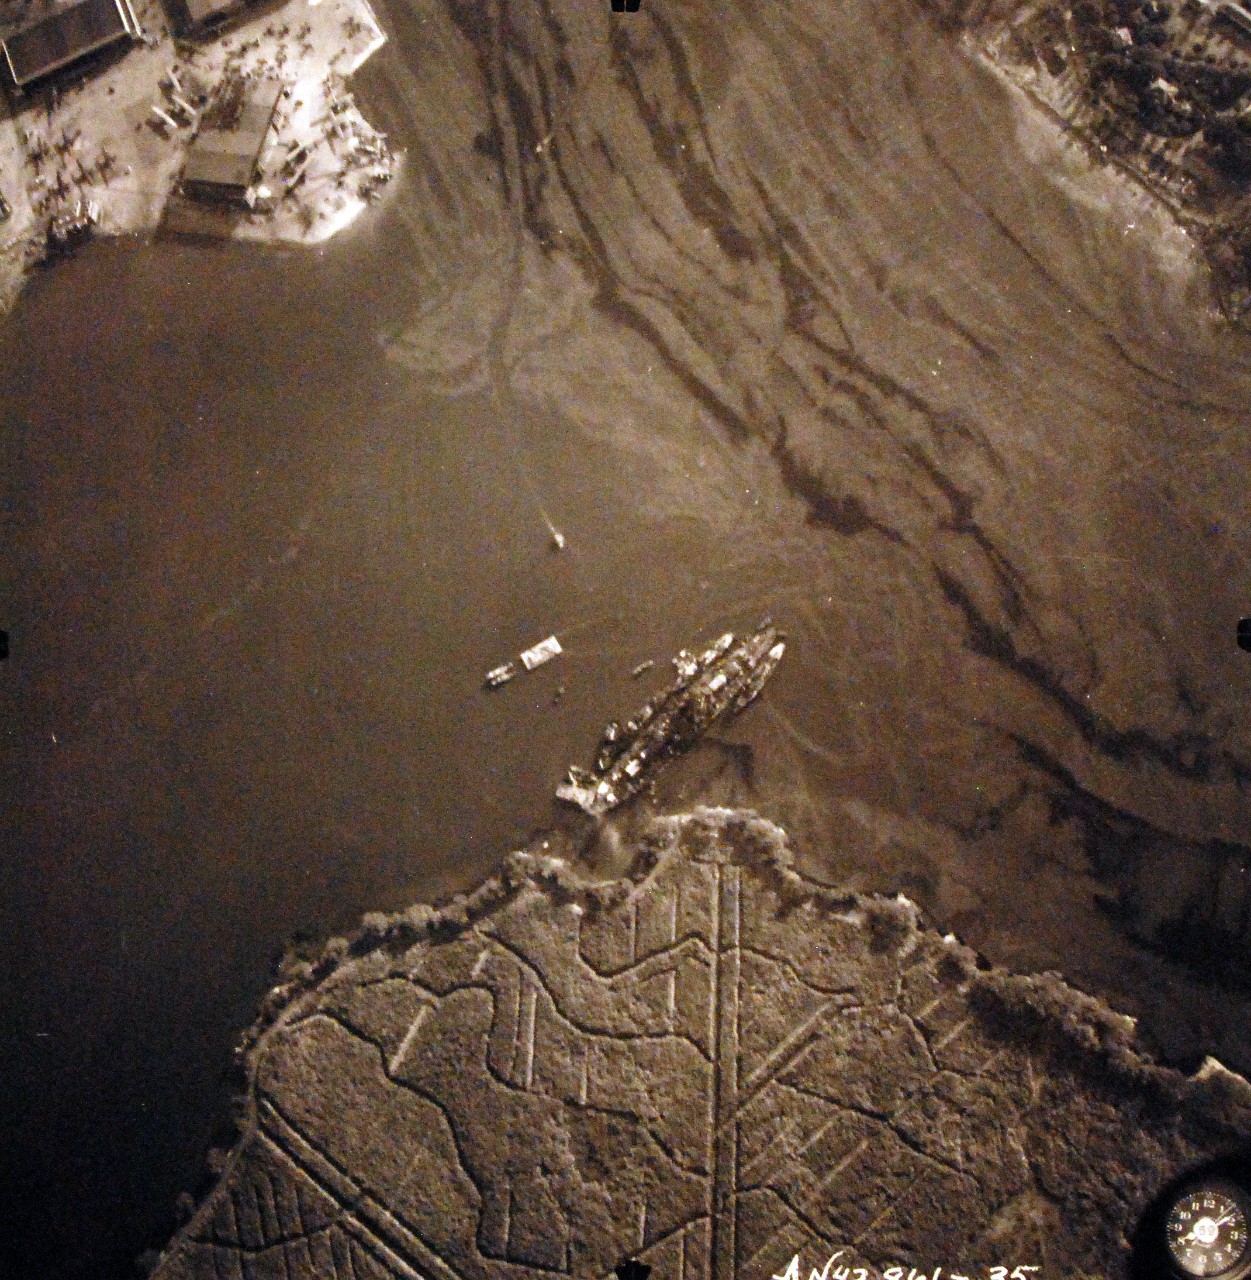 80-G-387595:  Pearl Harbor Attack, 7 December 1941.  Aerial view of "Battleship Row" moorings on the southern side of Ford Island, 10 December 1941, showing damage from the Japanese raid three days earlier.  USS Nevada (BB 36) is shown off Waipaio Point. Photographed by VJ-1 at an altitude of 3,000 feet and released November 9, 1950. U.S. Navy photograph, now in the collections of the National Archives.       (9/22/2015).